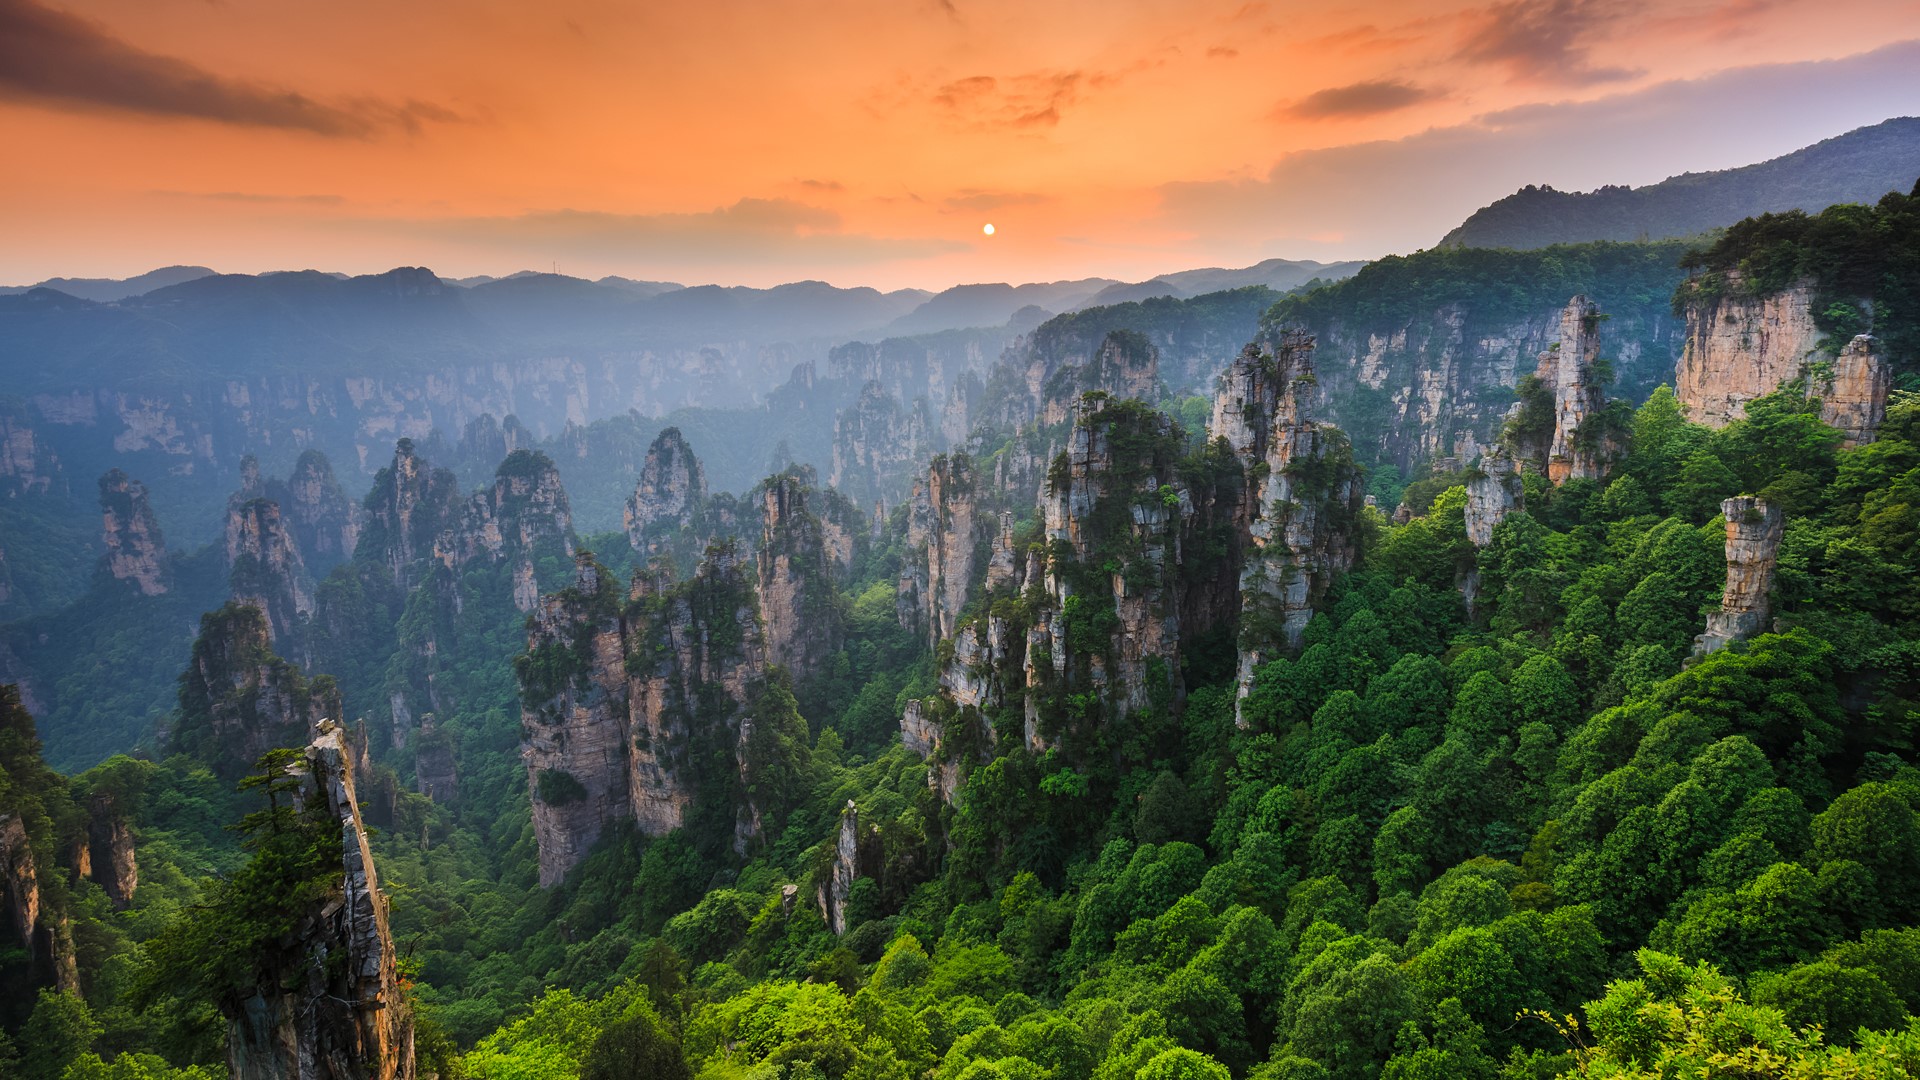 General 1920x1080 nature landscape Sun sunset mountains trees forest rock formation clouds sky Zhangjiajie National Park  Hunan China